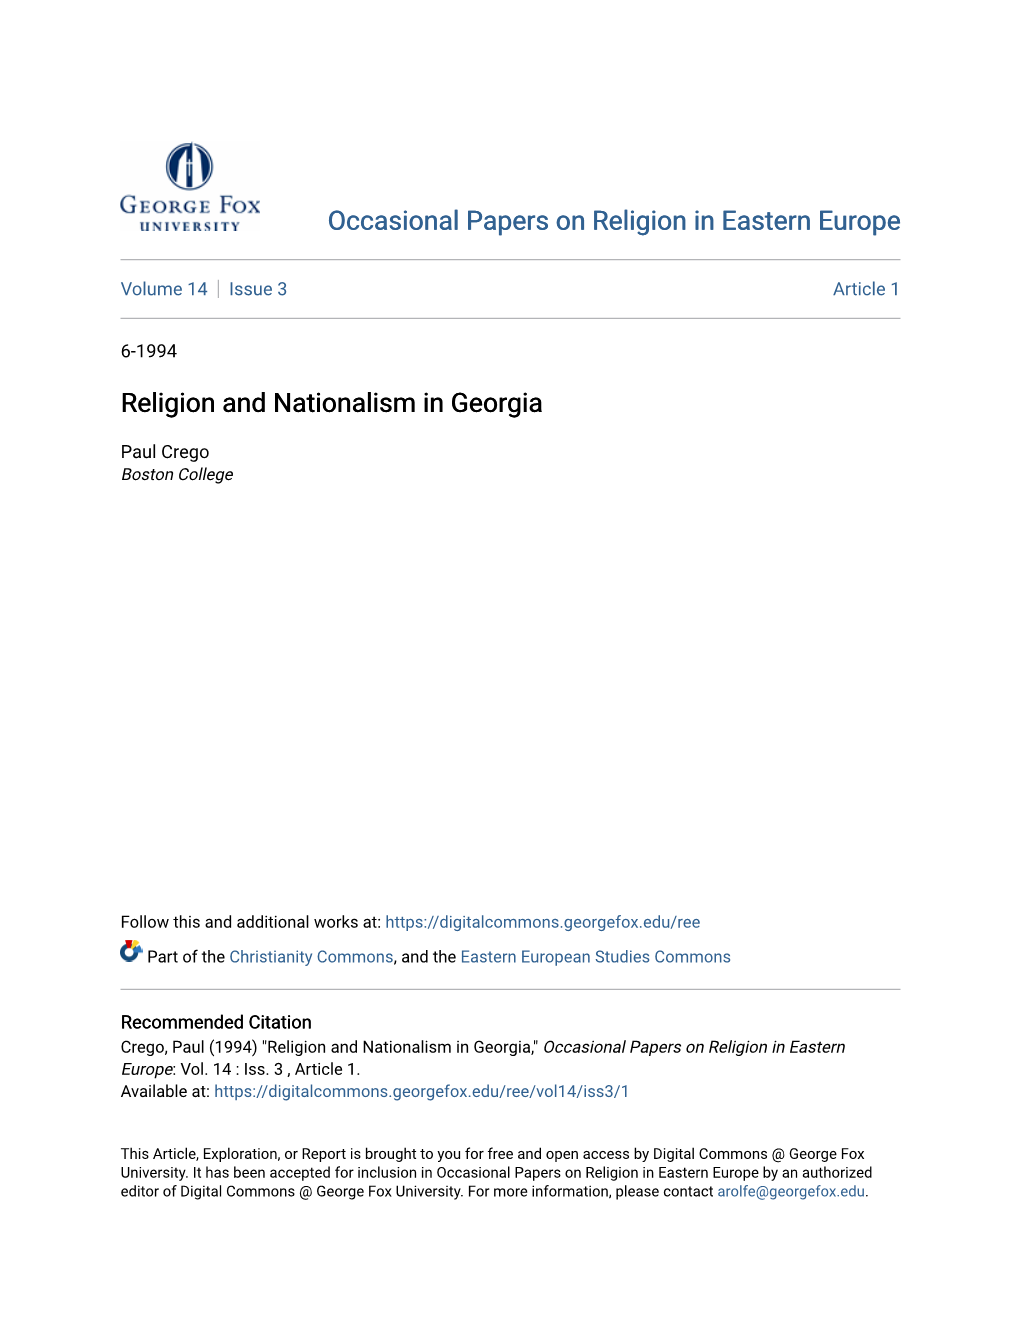 Religion and Nationalism in Georgia